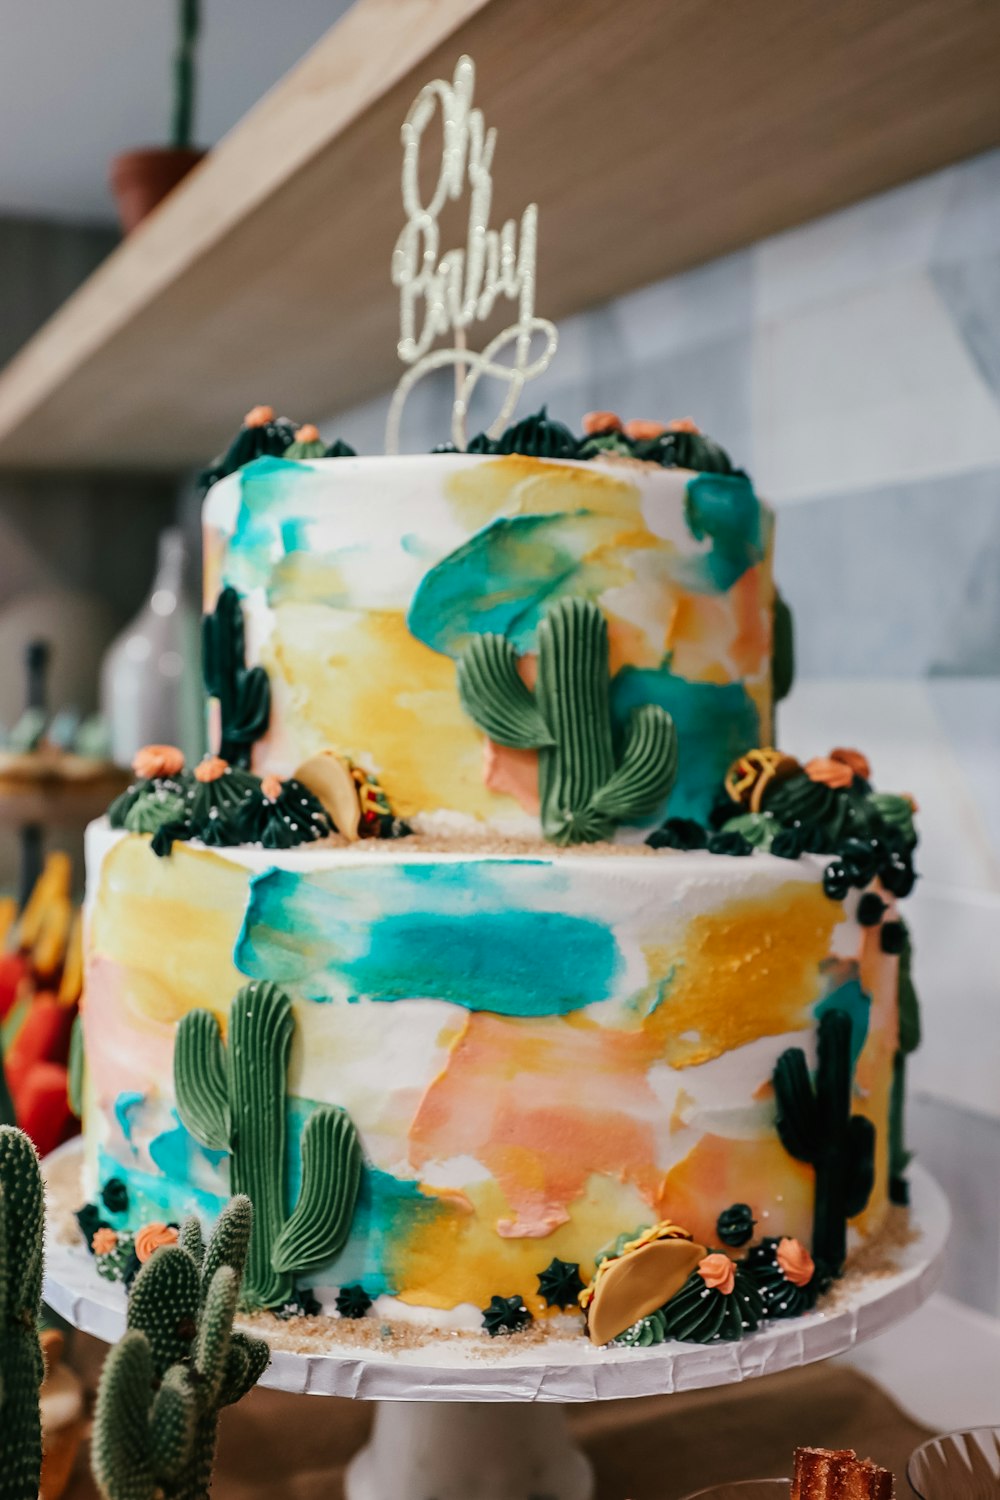 a cake with a design on it